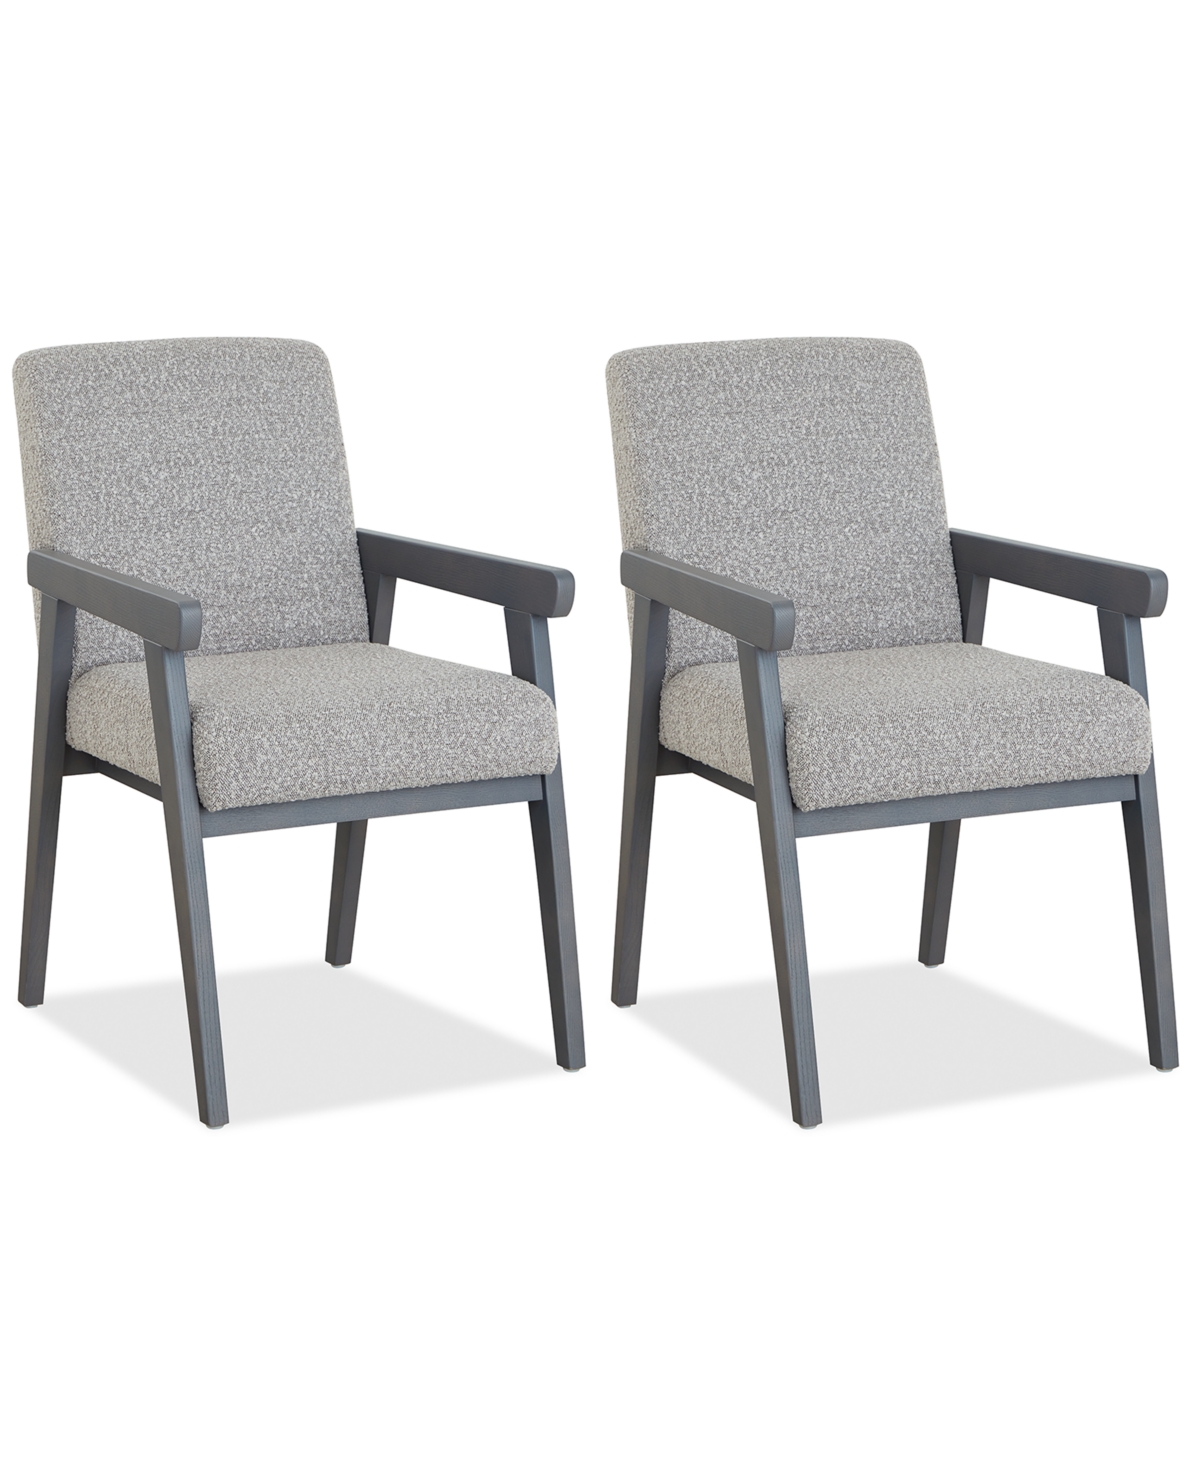 Shop Drexel Atwell 2pc Arm Chair Set In No Color